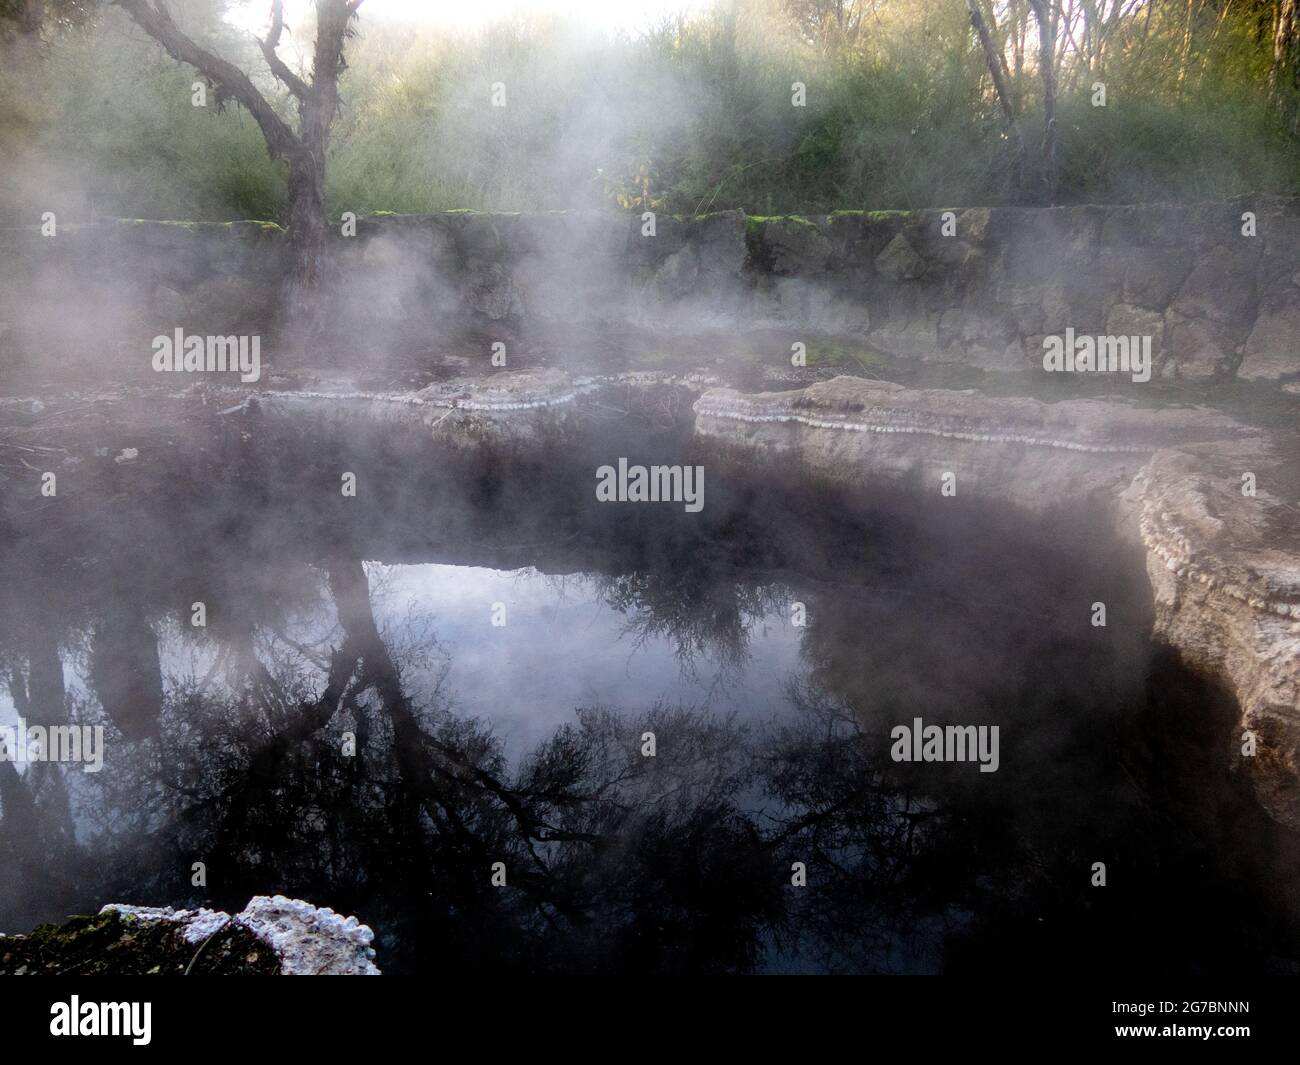 Steaming geothermal mineral pools, fenced off for safety, are a tourist attraction in Kuirau Park, Rotorua, New Zealand Stock Photo